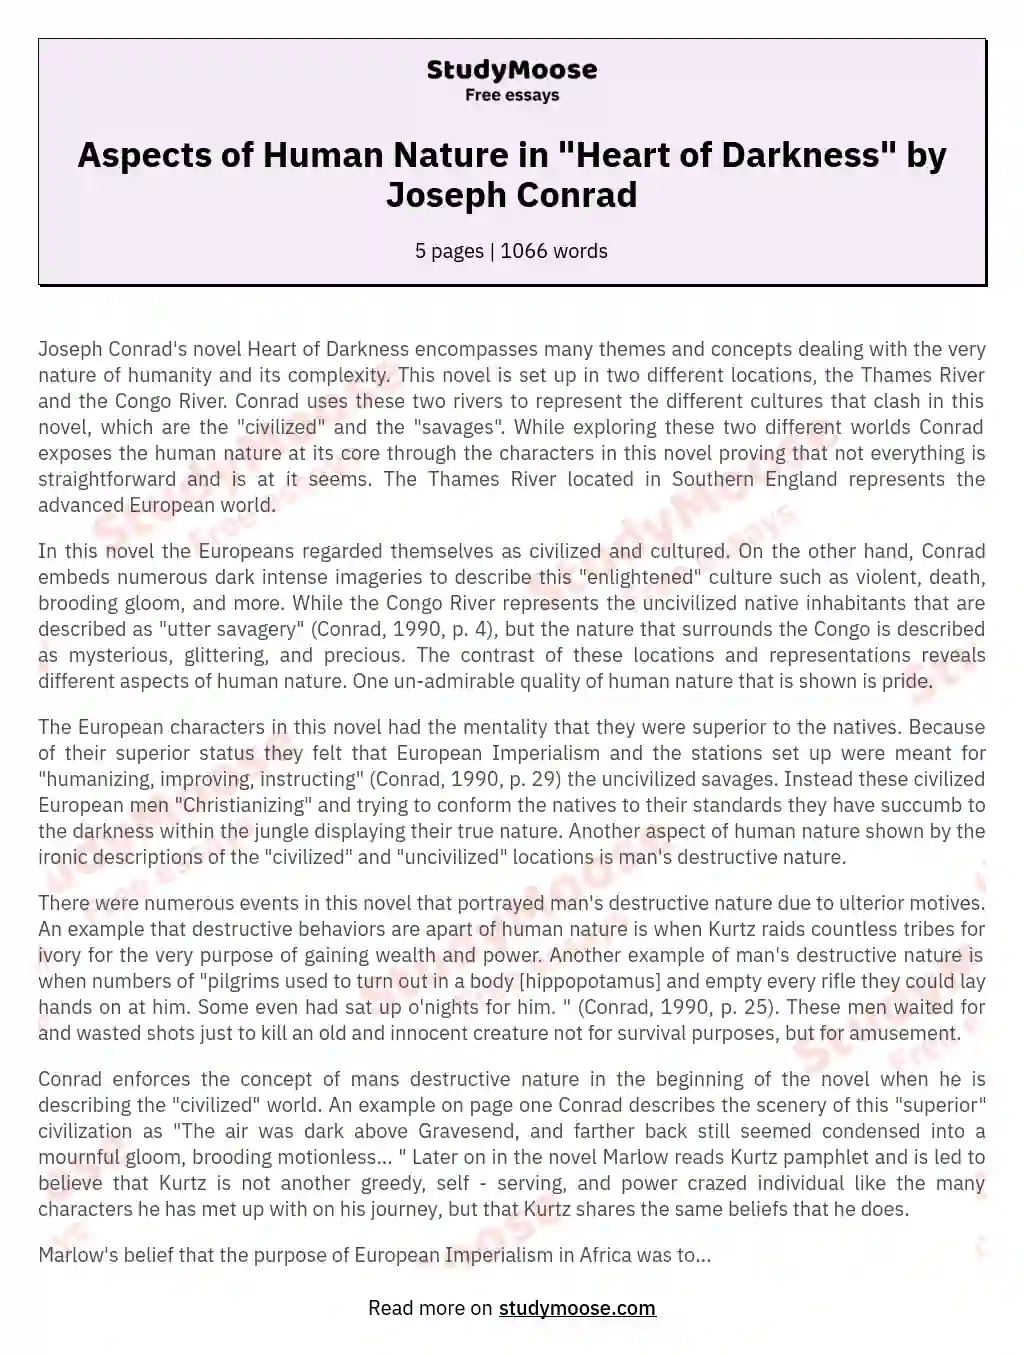 Aspects of Human Nature in "Heart of Darkness" by Joseph Conrad essay